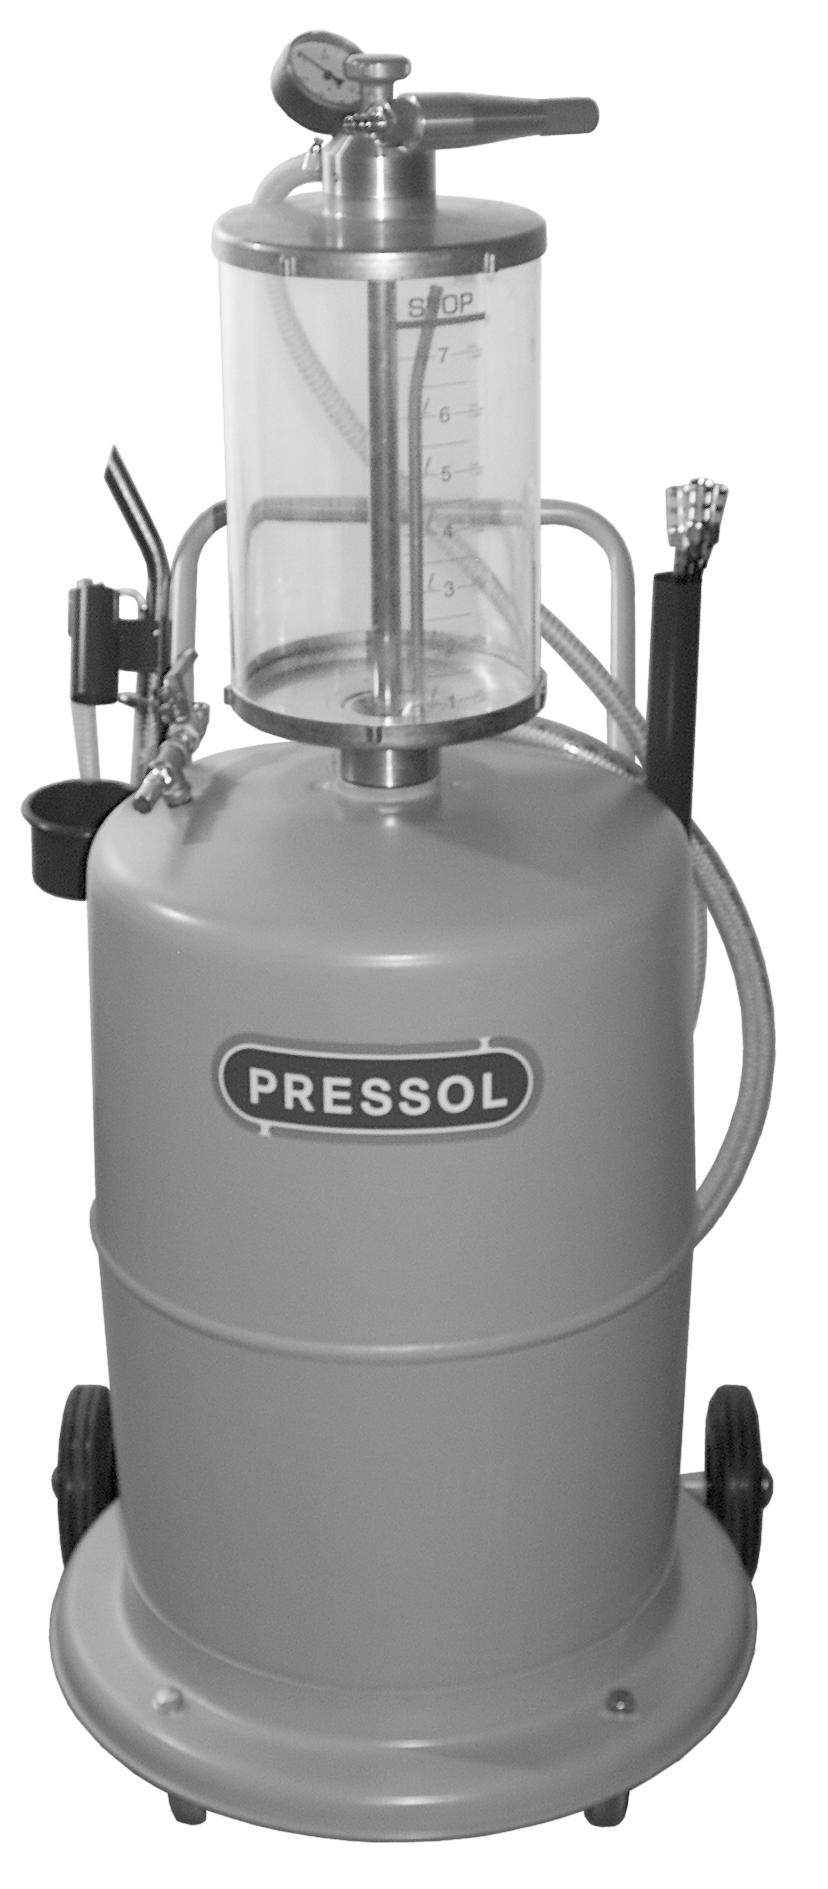 75 l, with Visual inspection reservoir 95 l, with Visual inspection reservoir Operating Instructions Contents: 1. General Information 1.1 Intended use 1.